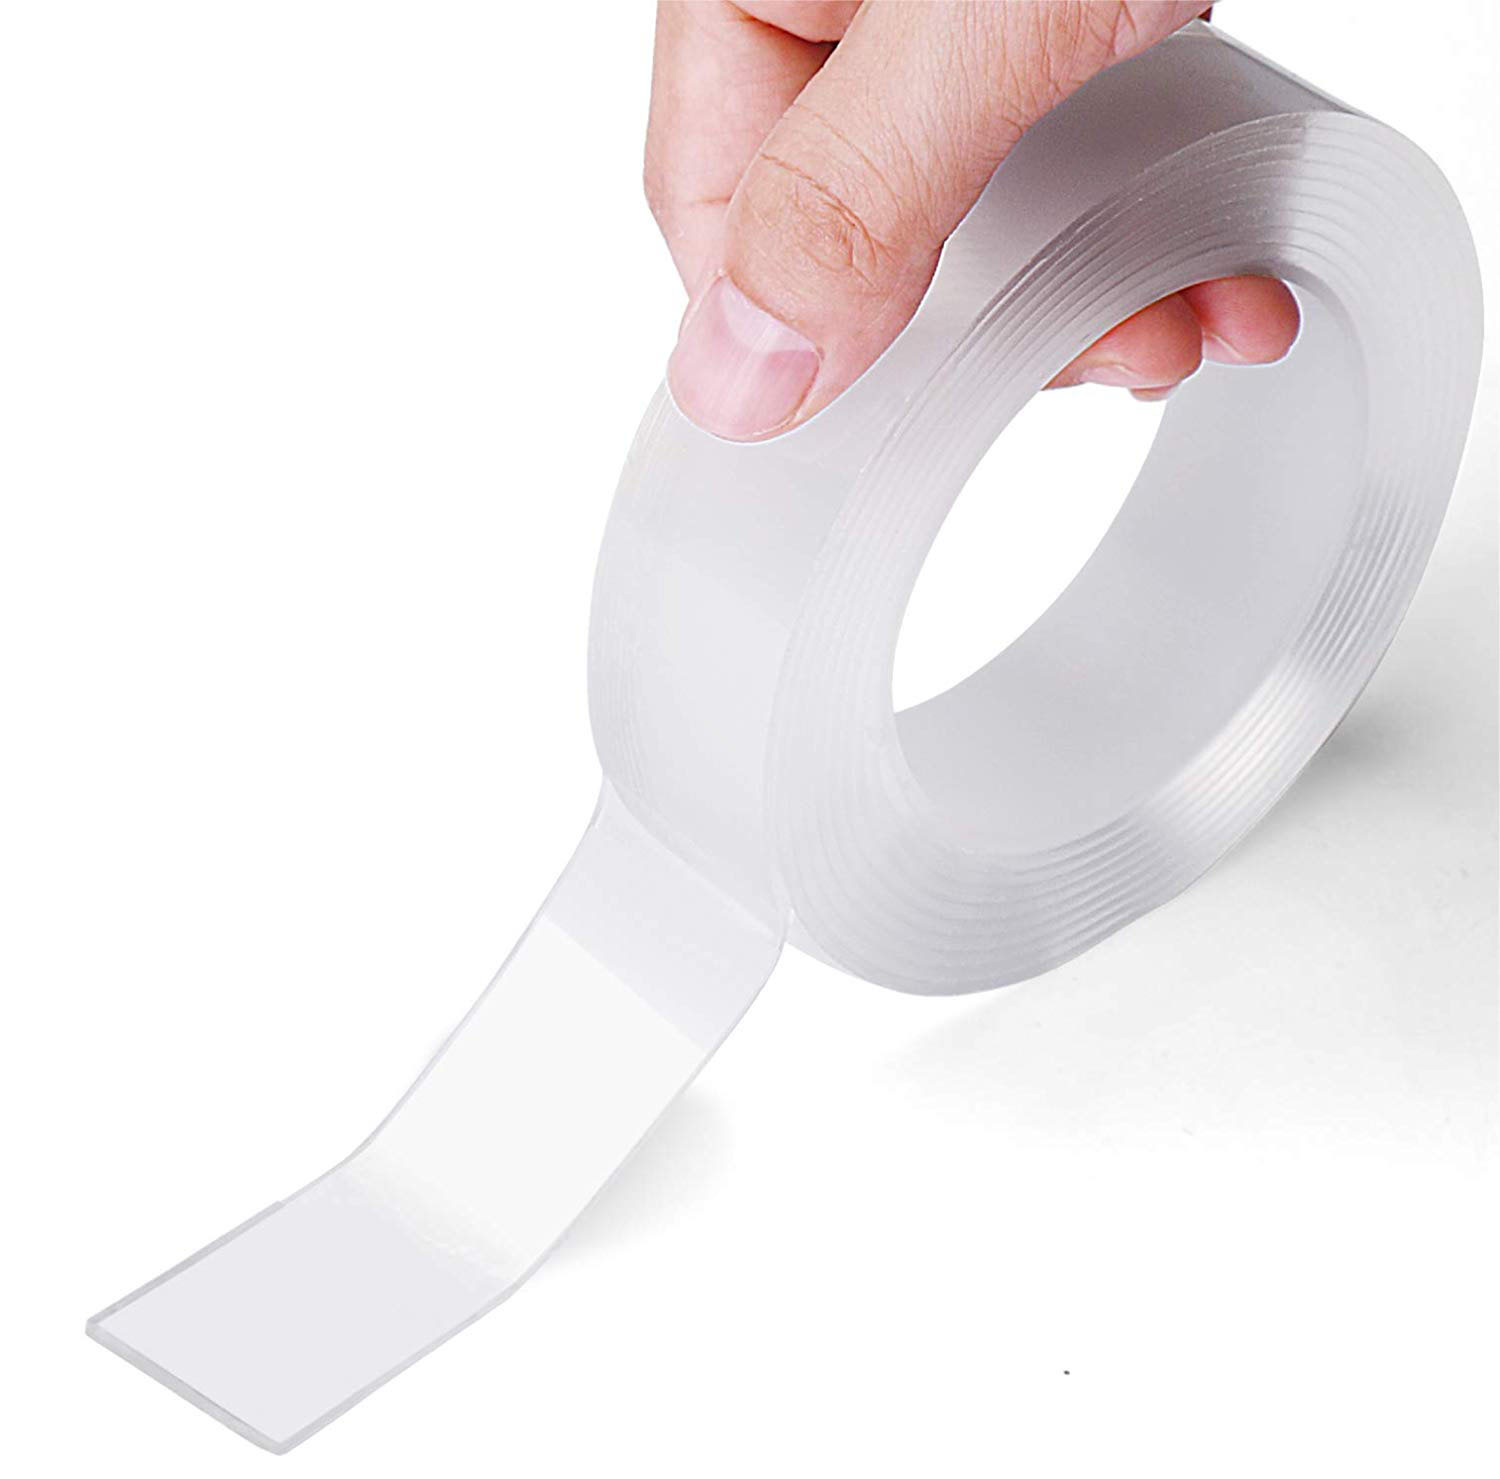 How to Remove Double-Sided Foam Tape